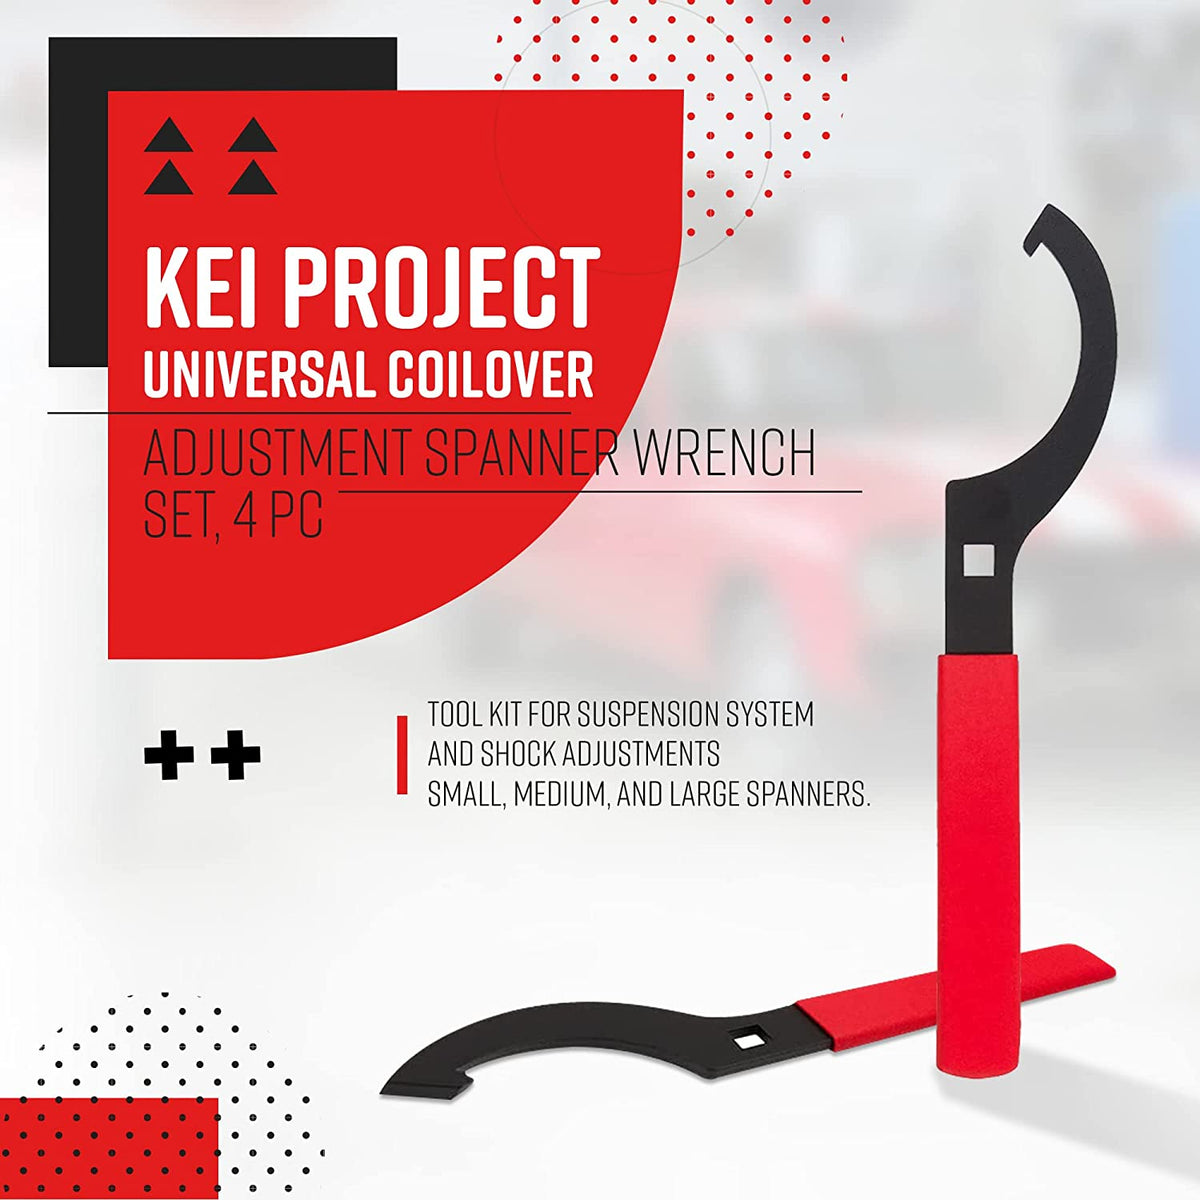 Kei Project Universal Coilover Adjustment Spanner Wrench Set, 4 Pc. Tool Kit for Suspension System and Shock Adjustments, Small, Medium, and Large Spanners